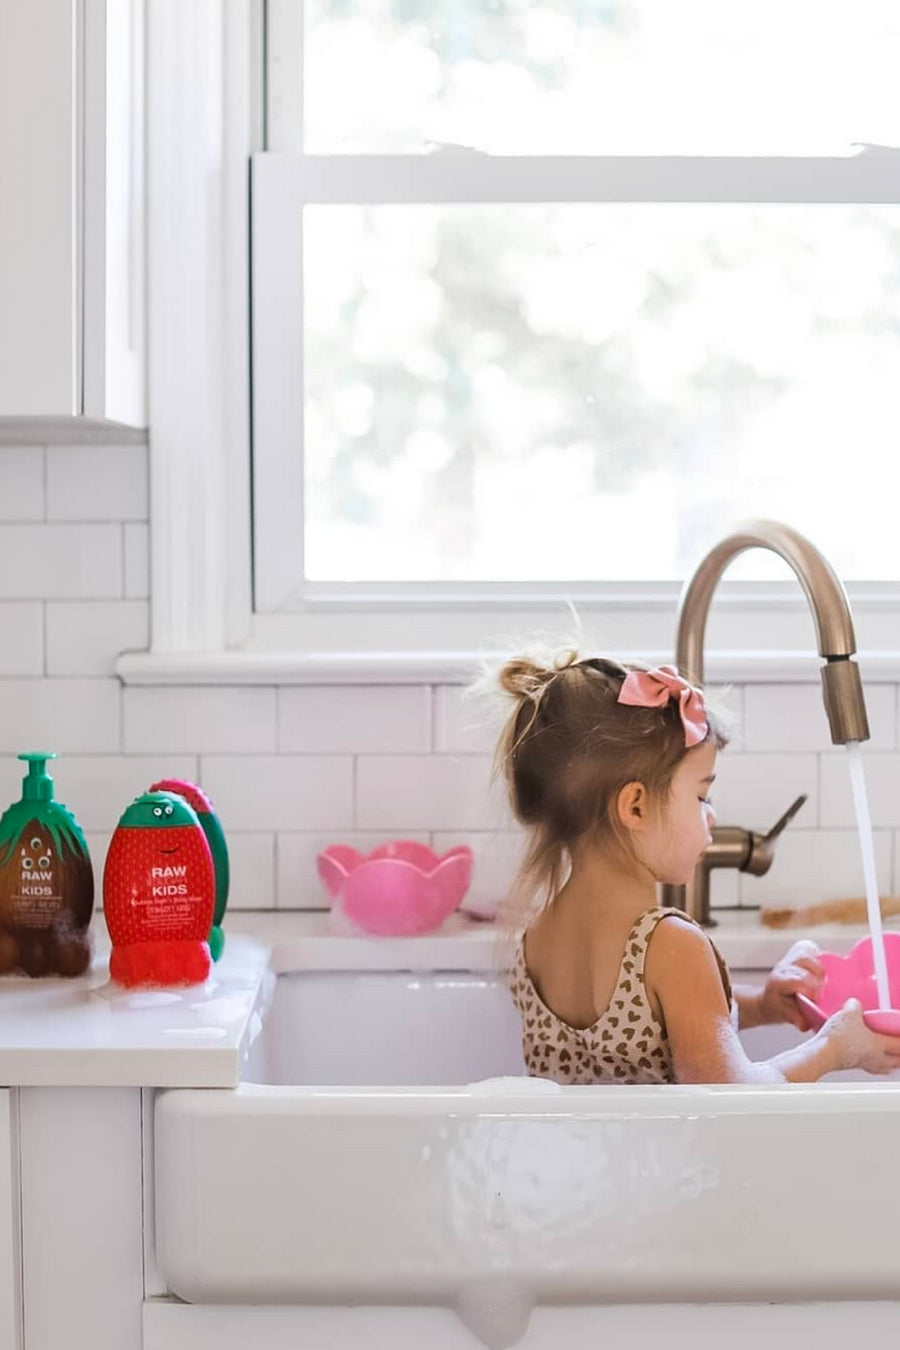 Girl playing in sink filling up a pink bowl with kids products to her left